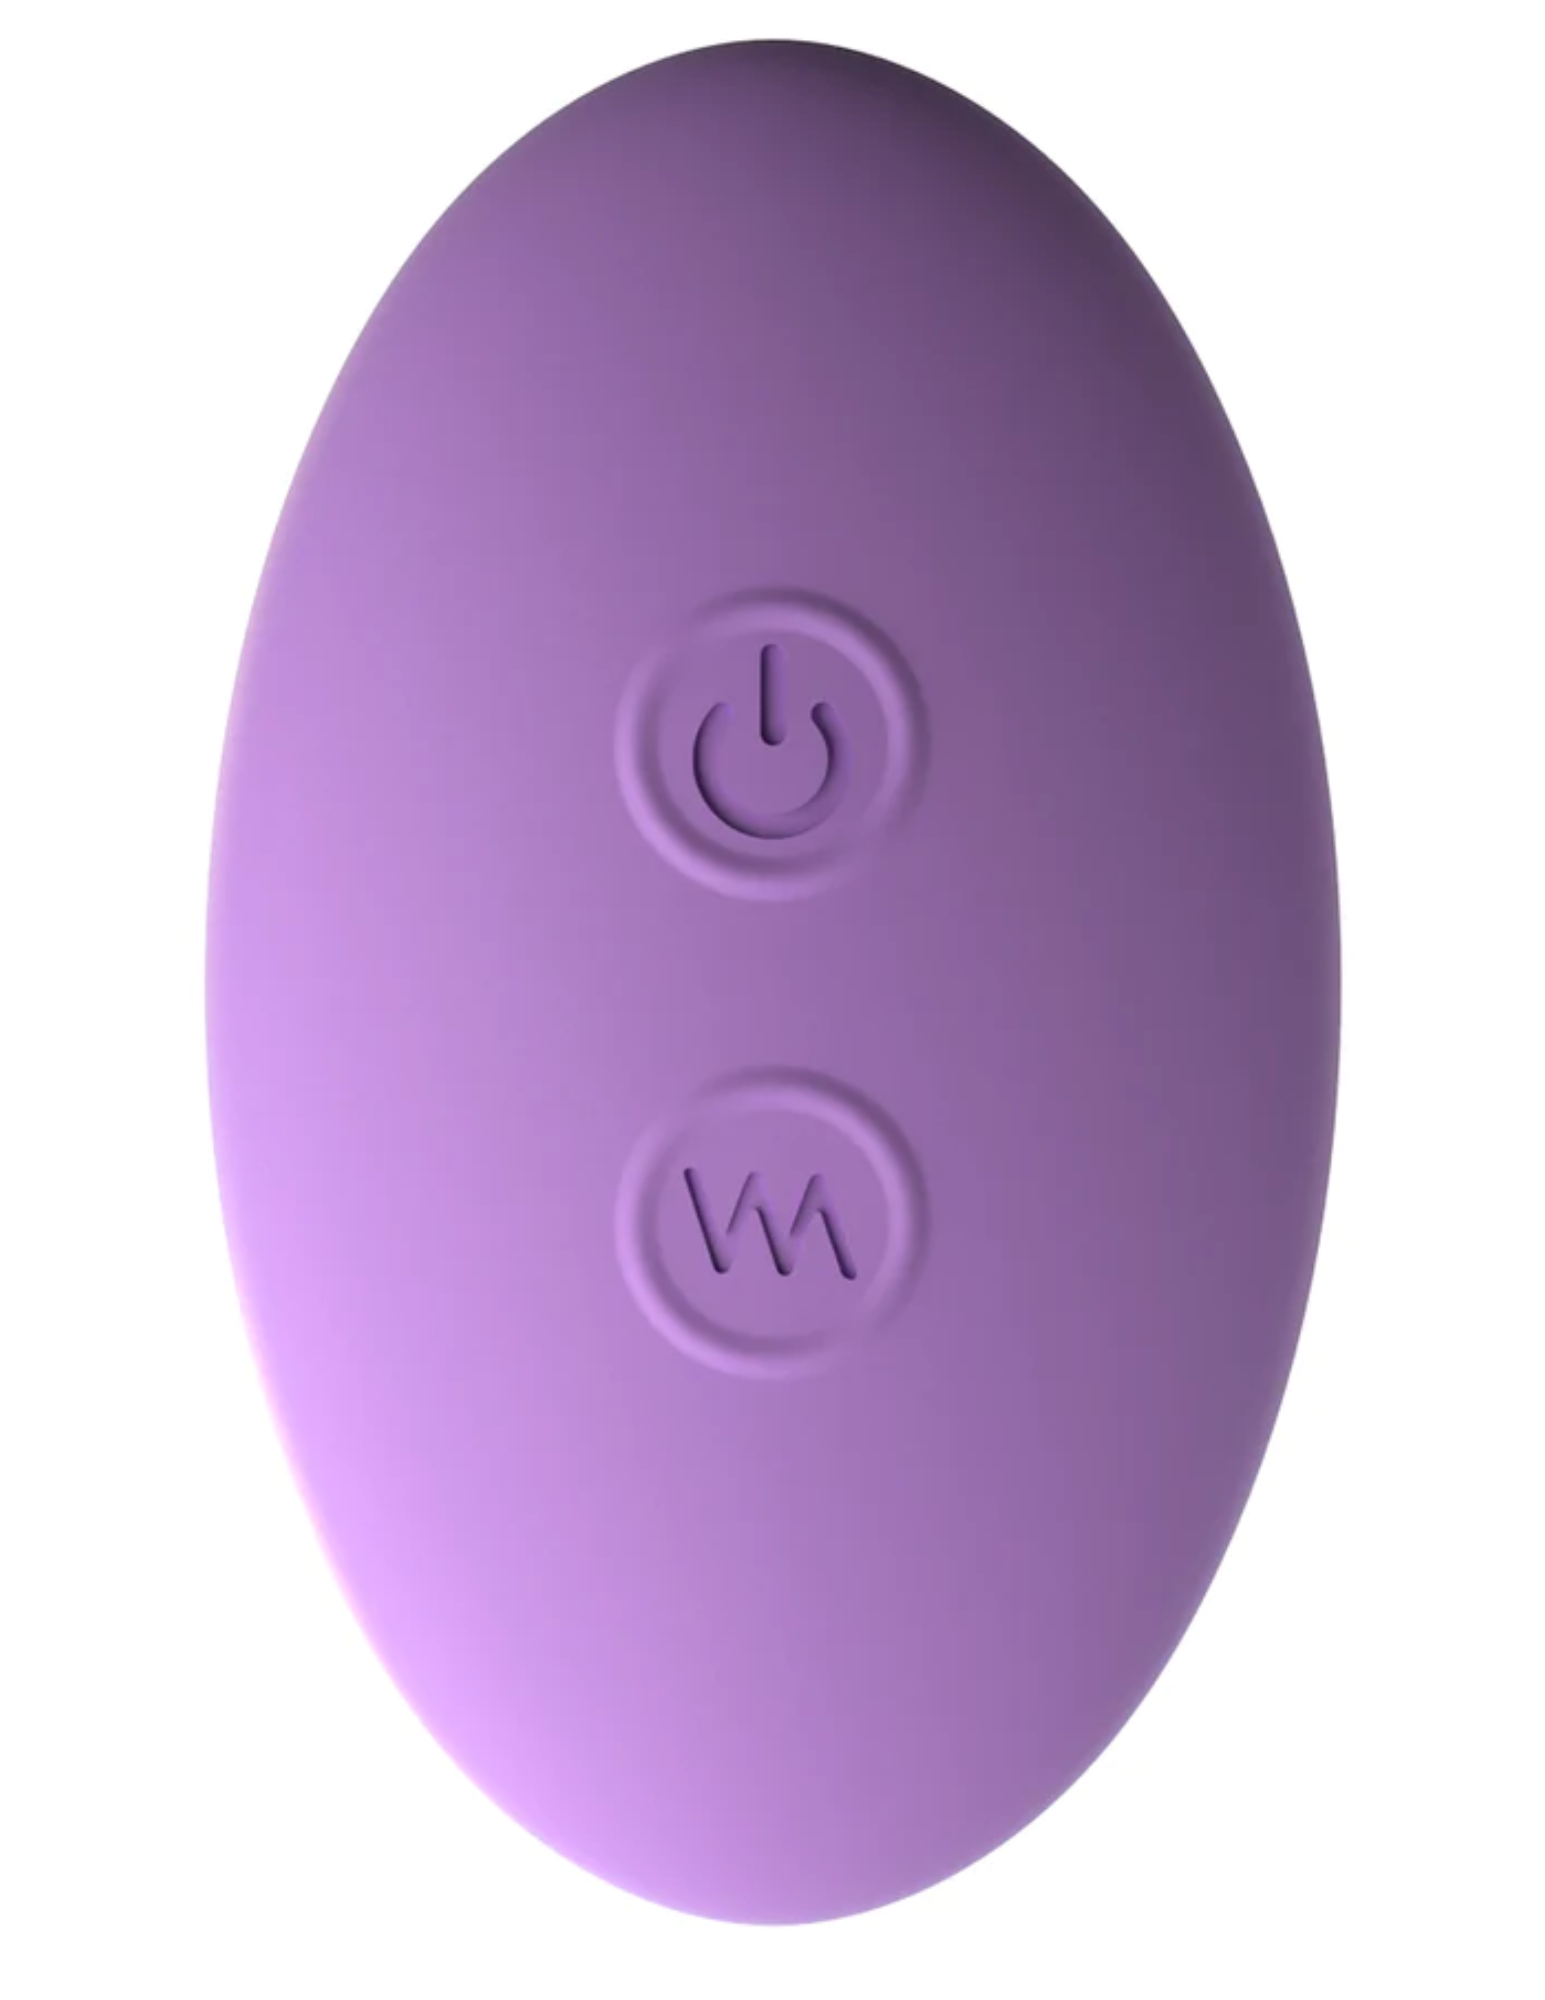 Close-up of the remote for the Fantasy For Her Remote Please Her Panty Vibe from Pipedreams.